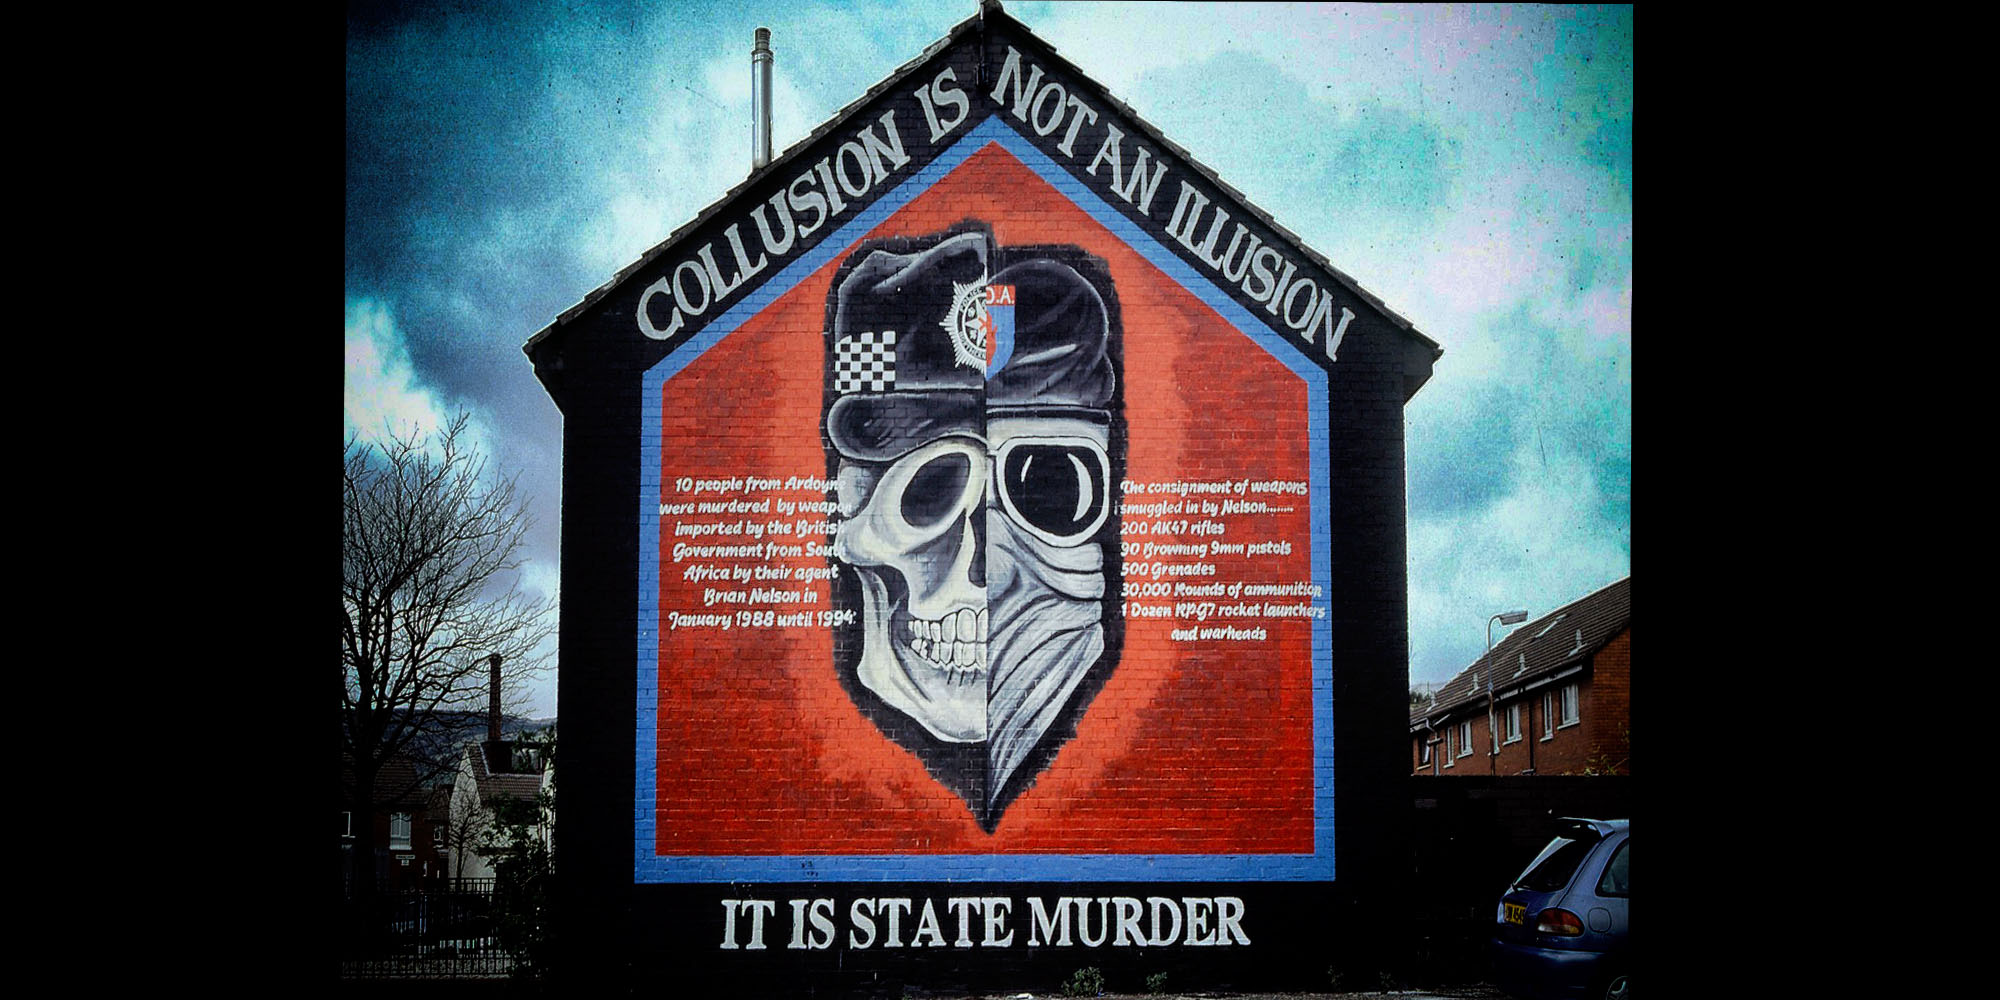 Explainer: British collusion in Northern Ireland’s dirty war